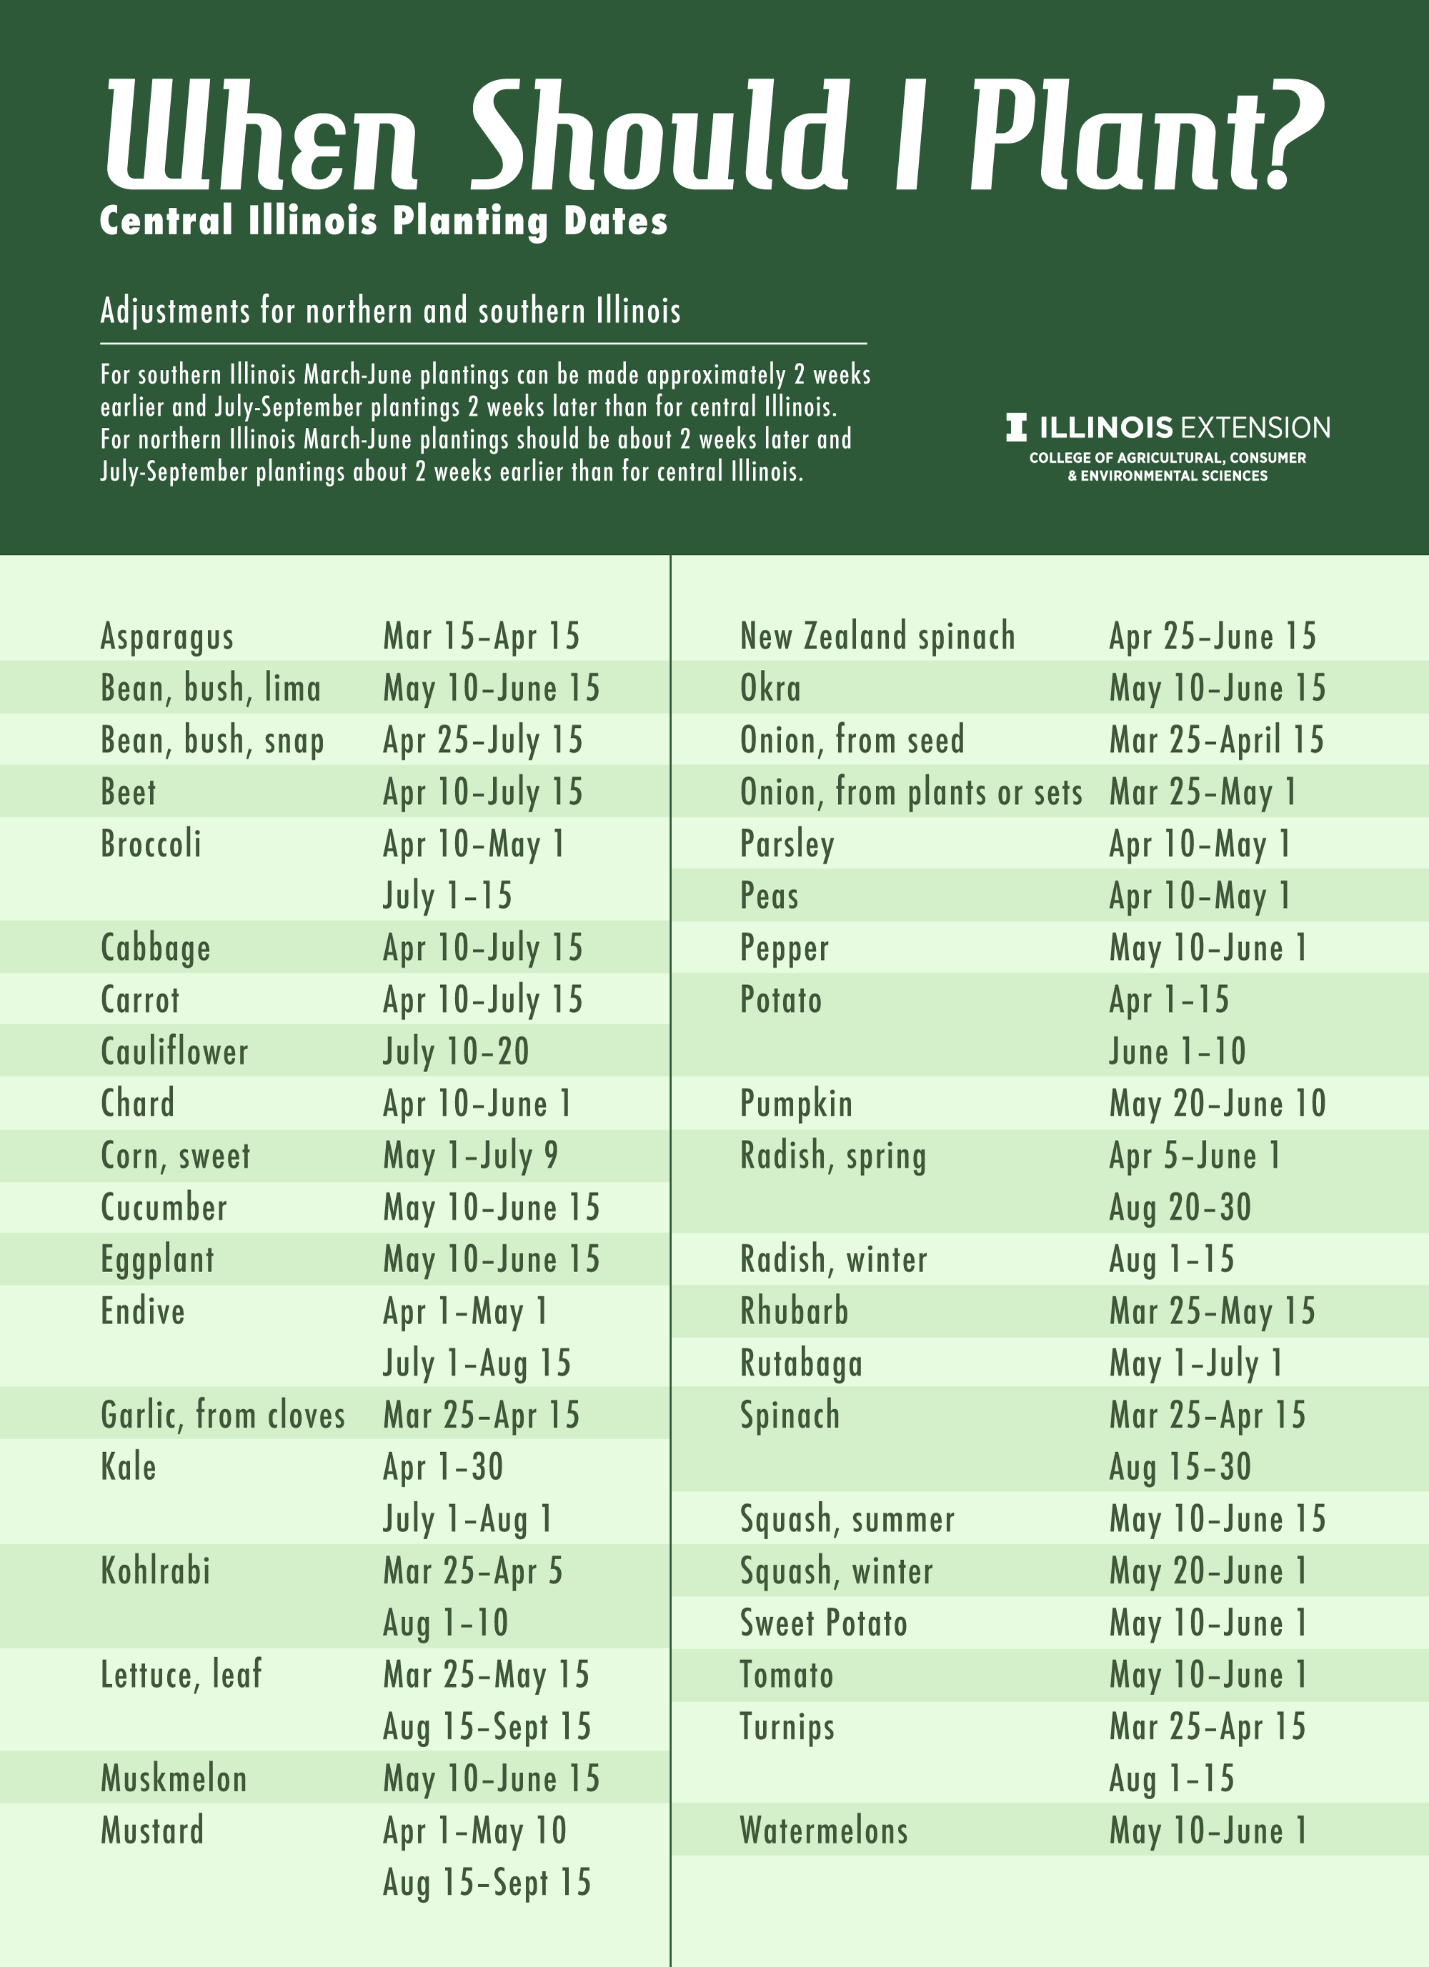 planting dates for common crops in illinois